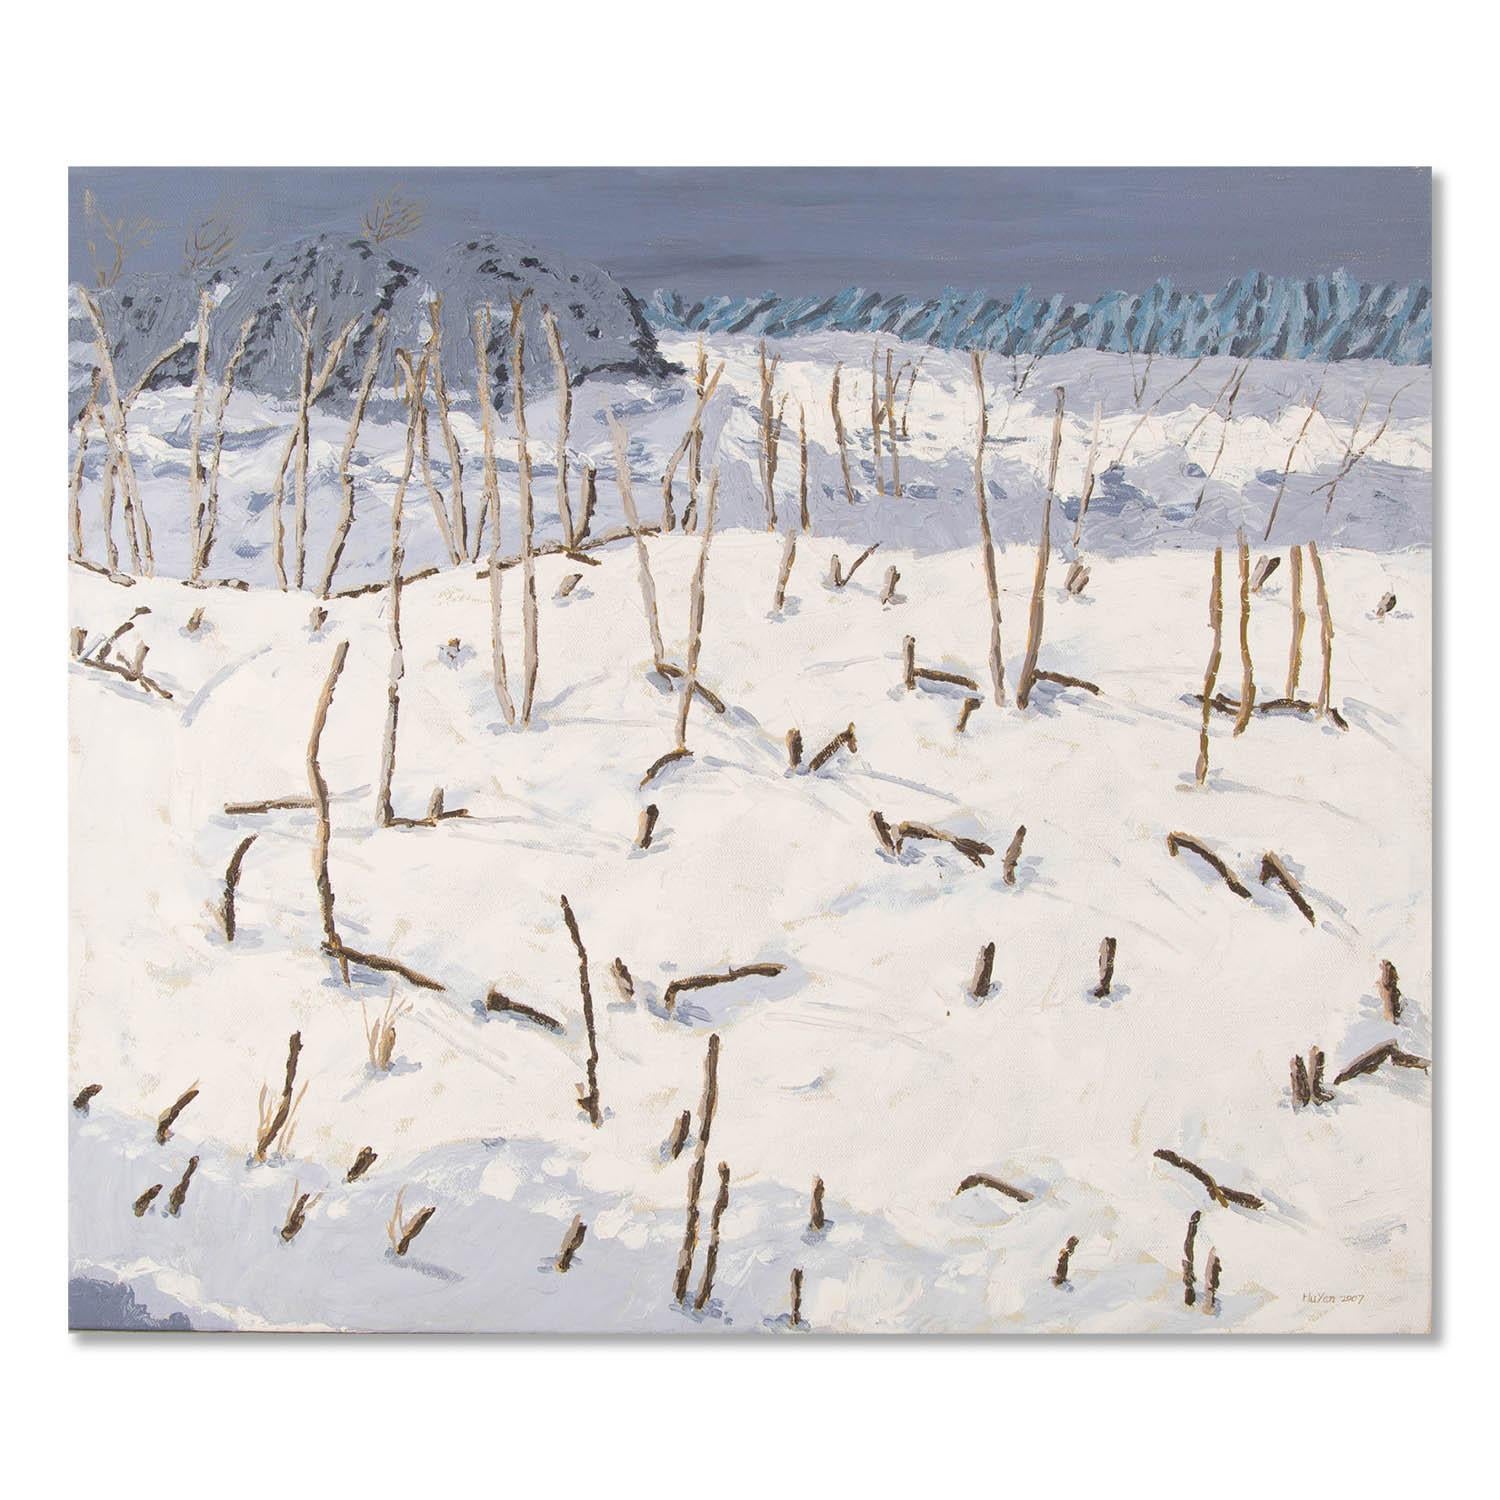  Title: Snow View 3
 Medium: Oil on canvas
 Size: 23 x 27 inches
 Frame: Framing options available!
 Condition: The painting appears to be in excellent condition.
 
 Year: 2007
 Artist: Yan Hu
 Signature: Signed
 Signature Location: Lower right
